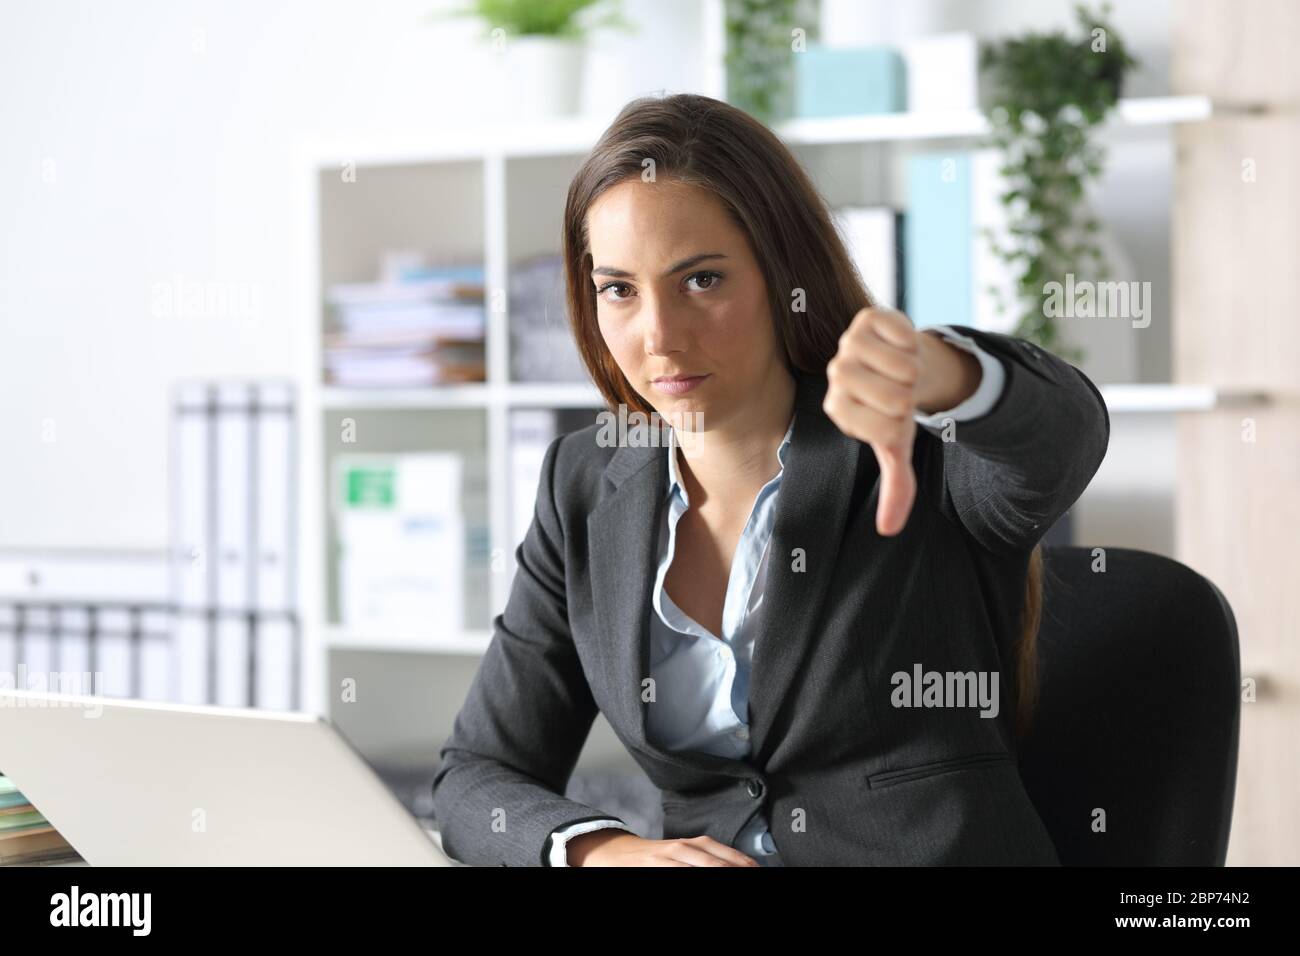 Serious executive woman gesturing thumbs down looking camera sitting on a desk at the office Stock Photo